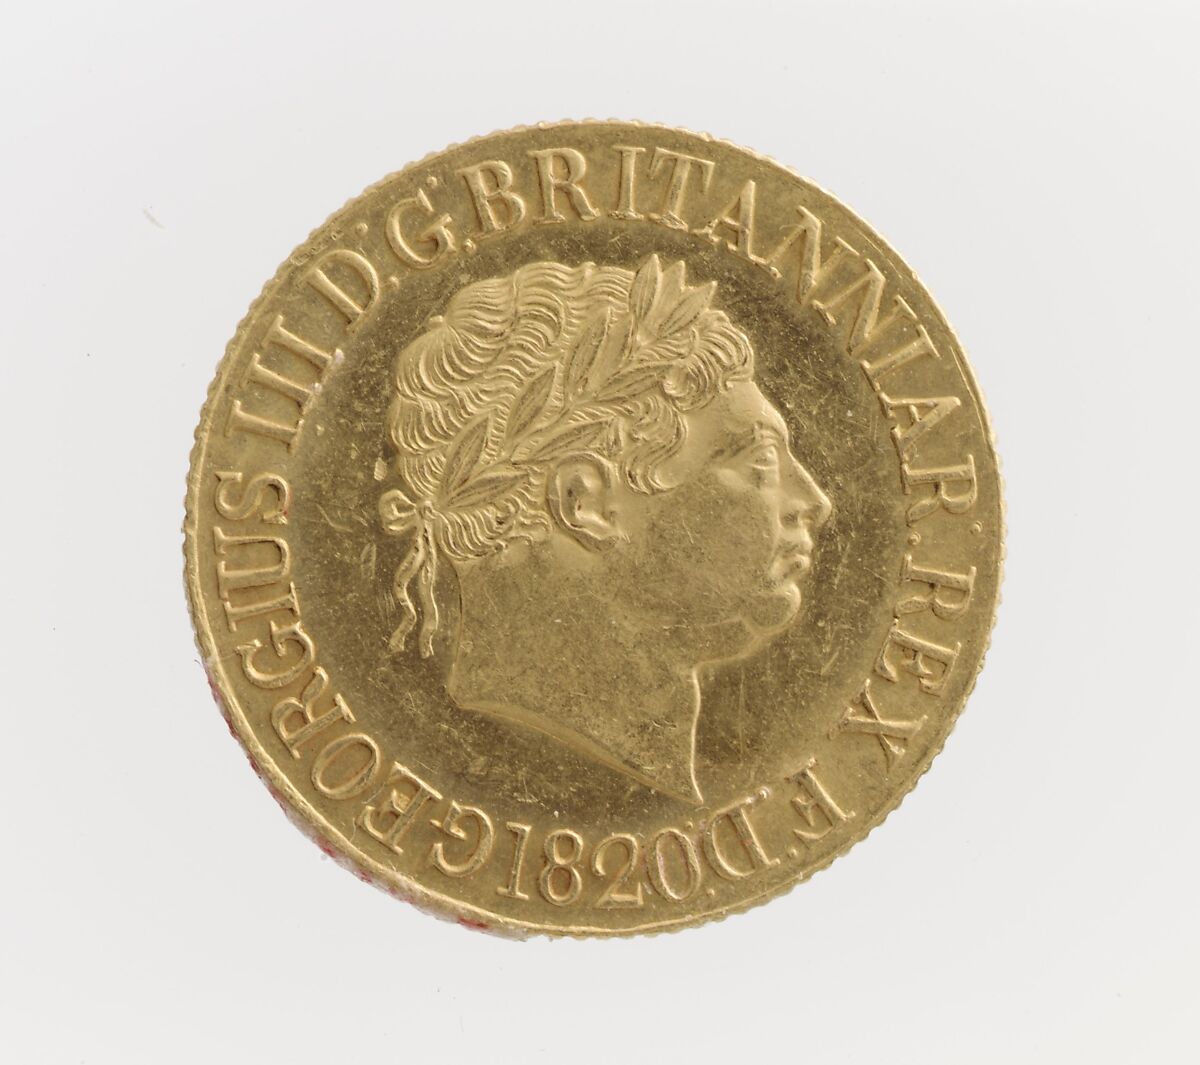 George III pattern sovereign with St. George reverse, Benedetto Pistrucci (Italian, 1783–1855, active England), Gold, British, London 